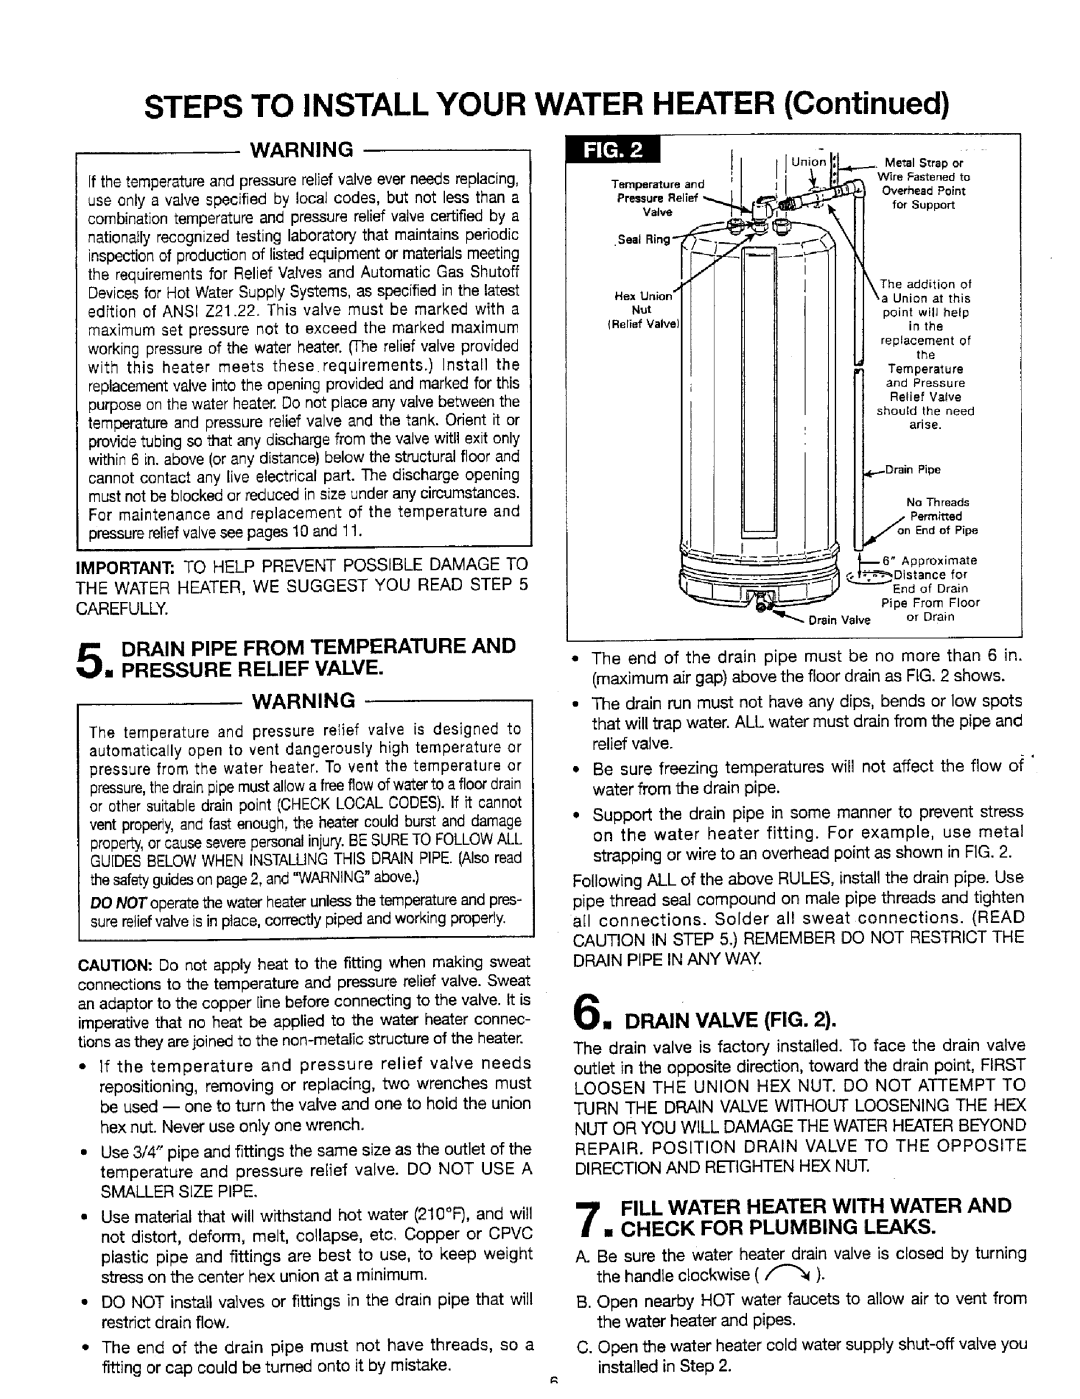 Sears 449.310411 Steps To Install Your, WATER HEATER Continued, I,i PJ, Drain Valve Fig, Check For Plumbing Leaks 